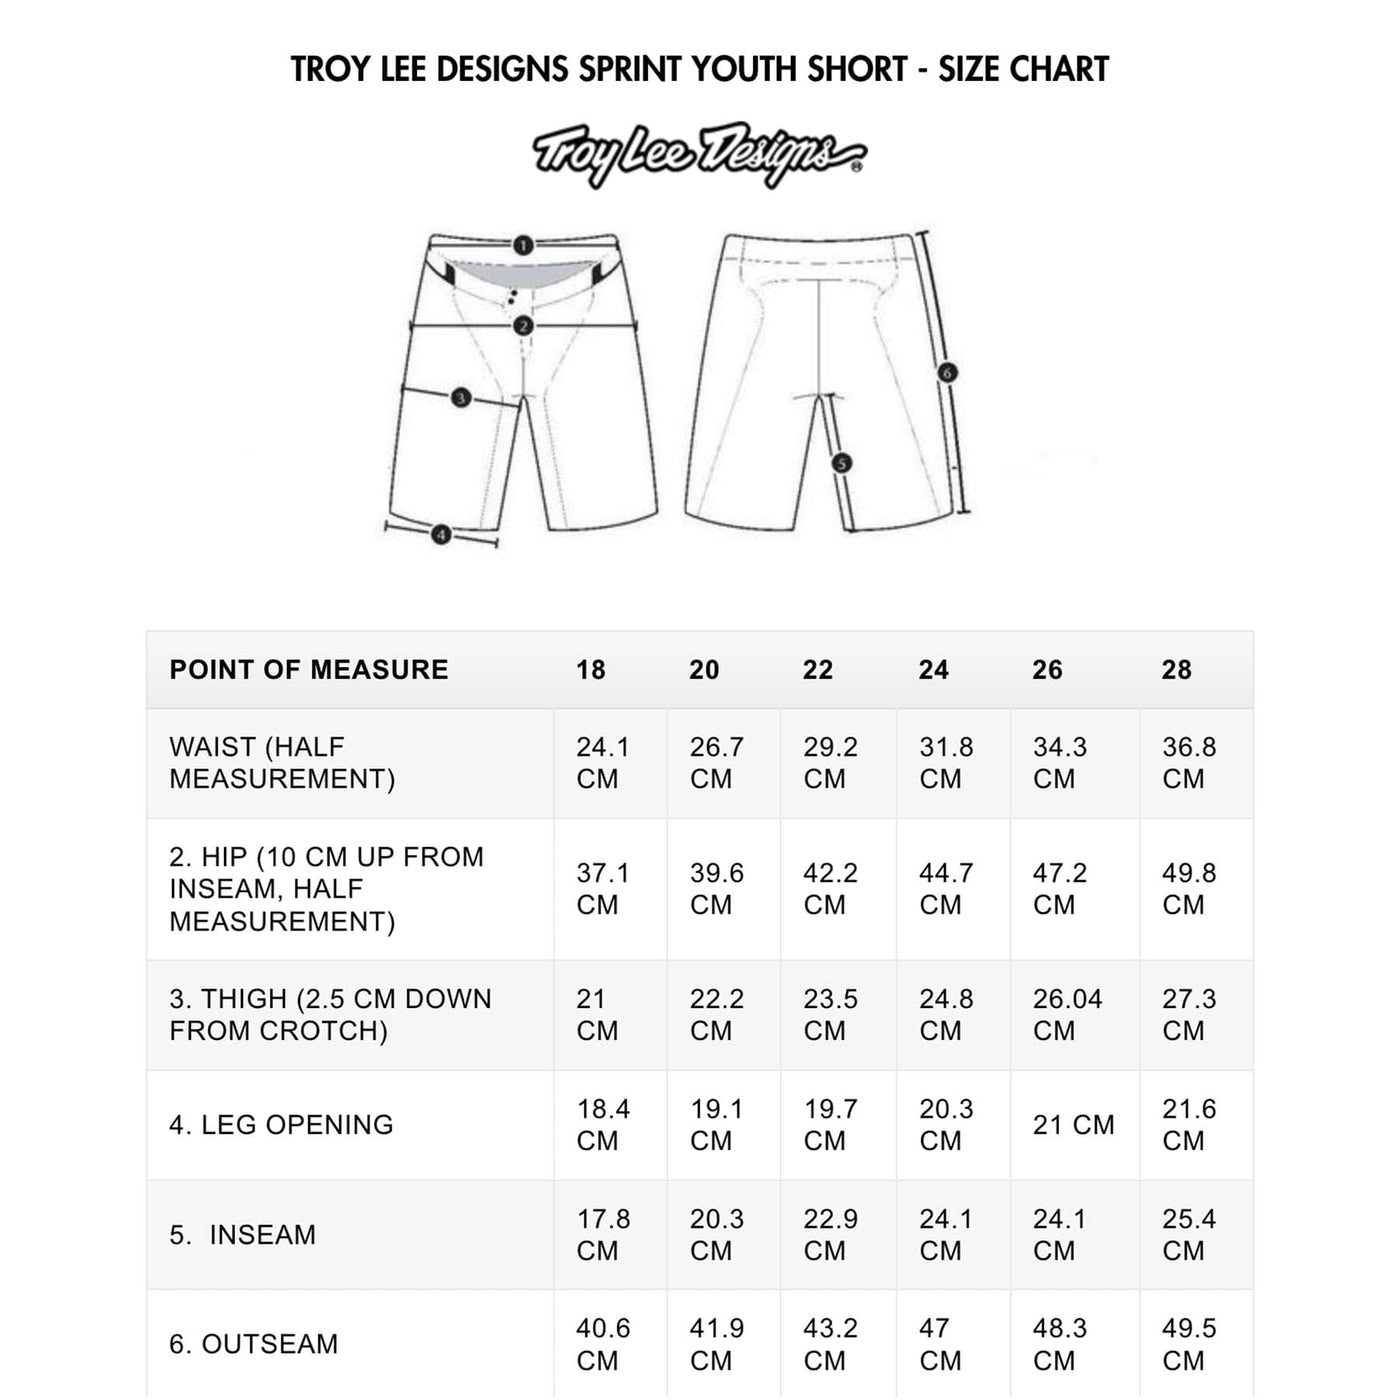 TROY LEE DESIGNS SPRINT YOUTH SHORT - SIZE CHART | 8Lines.eu - Fast Shipping